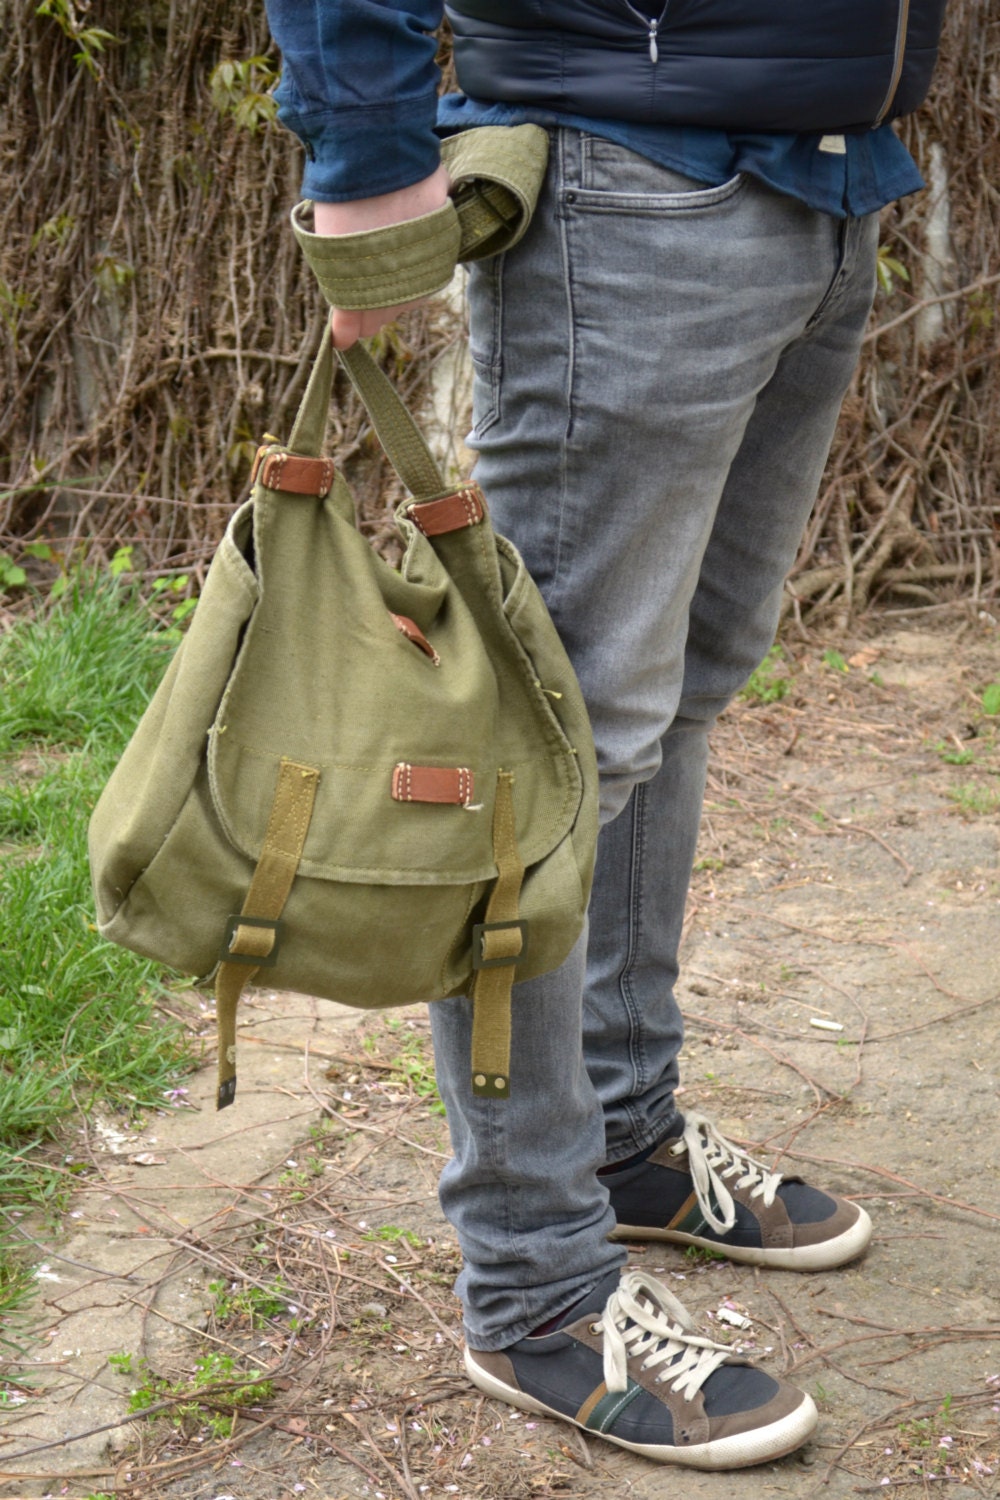 Army Surplus/shoulder Field Bag. Retro Style Side Bag Made 